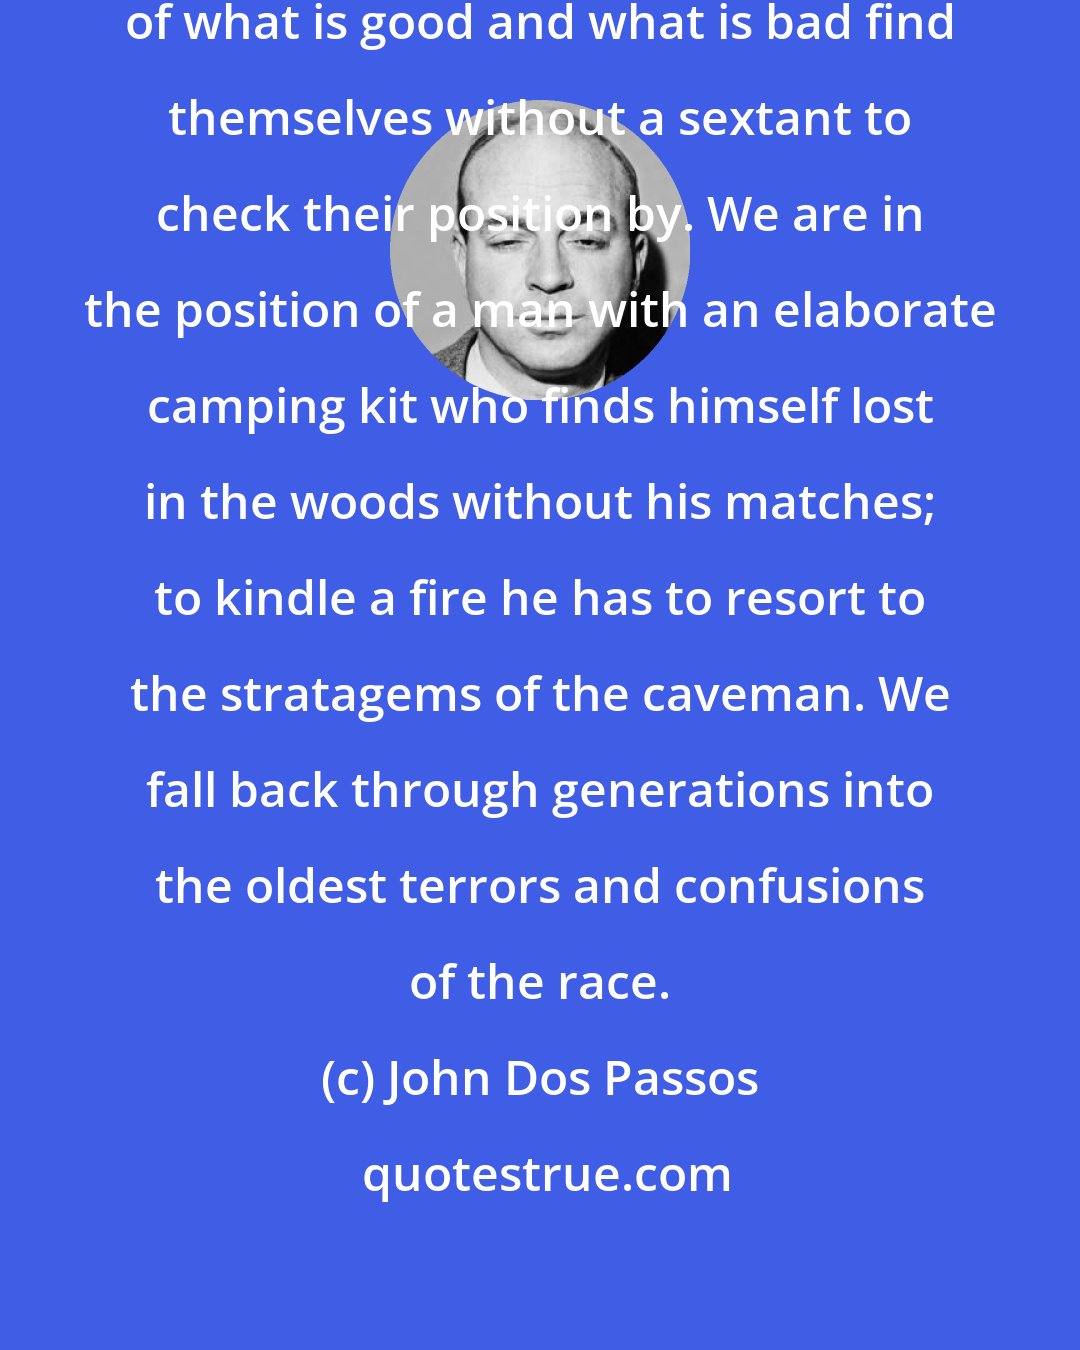 John Dos Passos: Men who have lost their conviction of what is good and what is bad find themselves without a sextant to check their position by. We are in the position of a man with an elaborate camping kit who finds himself lost in the woods without his matches; to kindle a fire he has to resort to the stratagems of the caveman. We fall back through generations into the oldest terrors and confusions of the race.